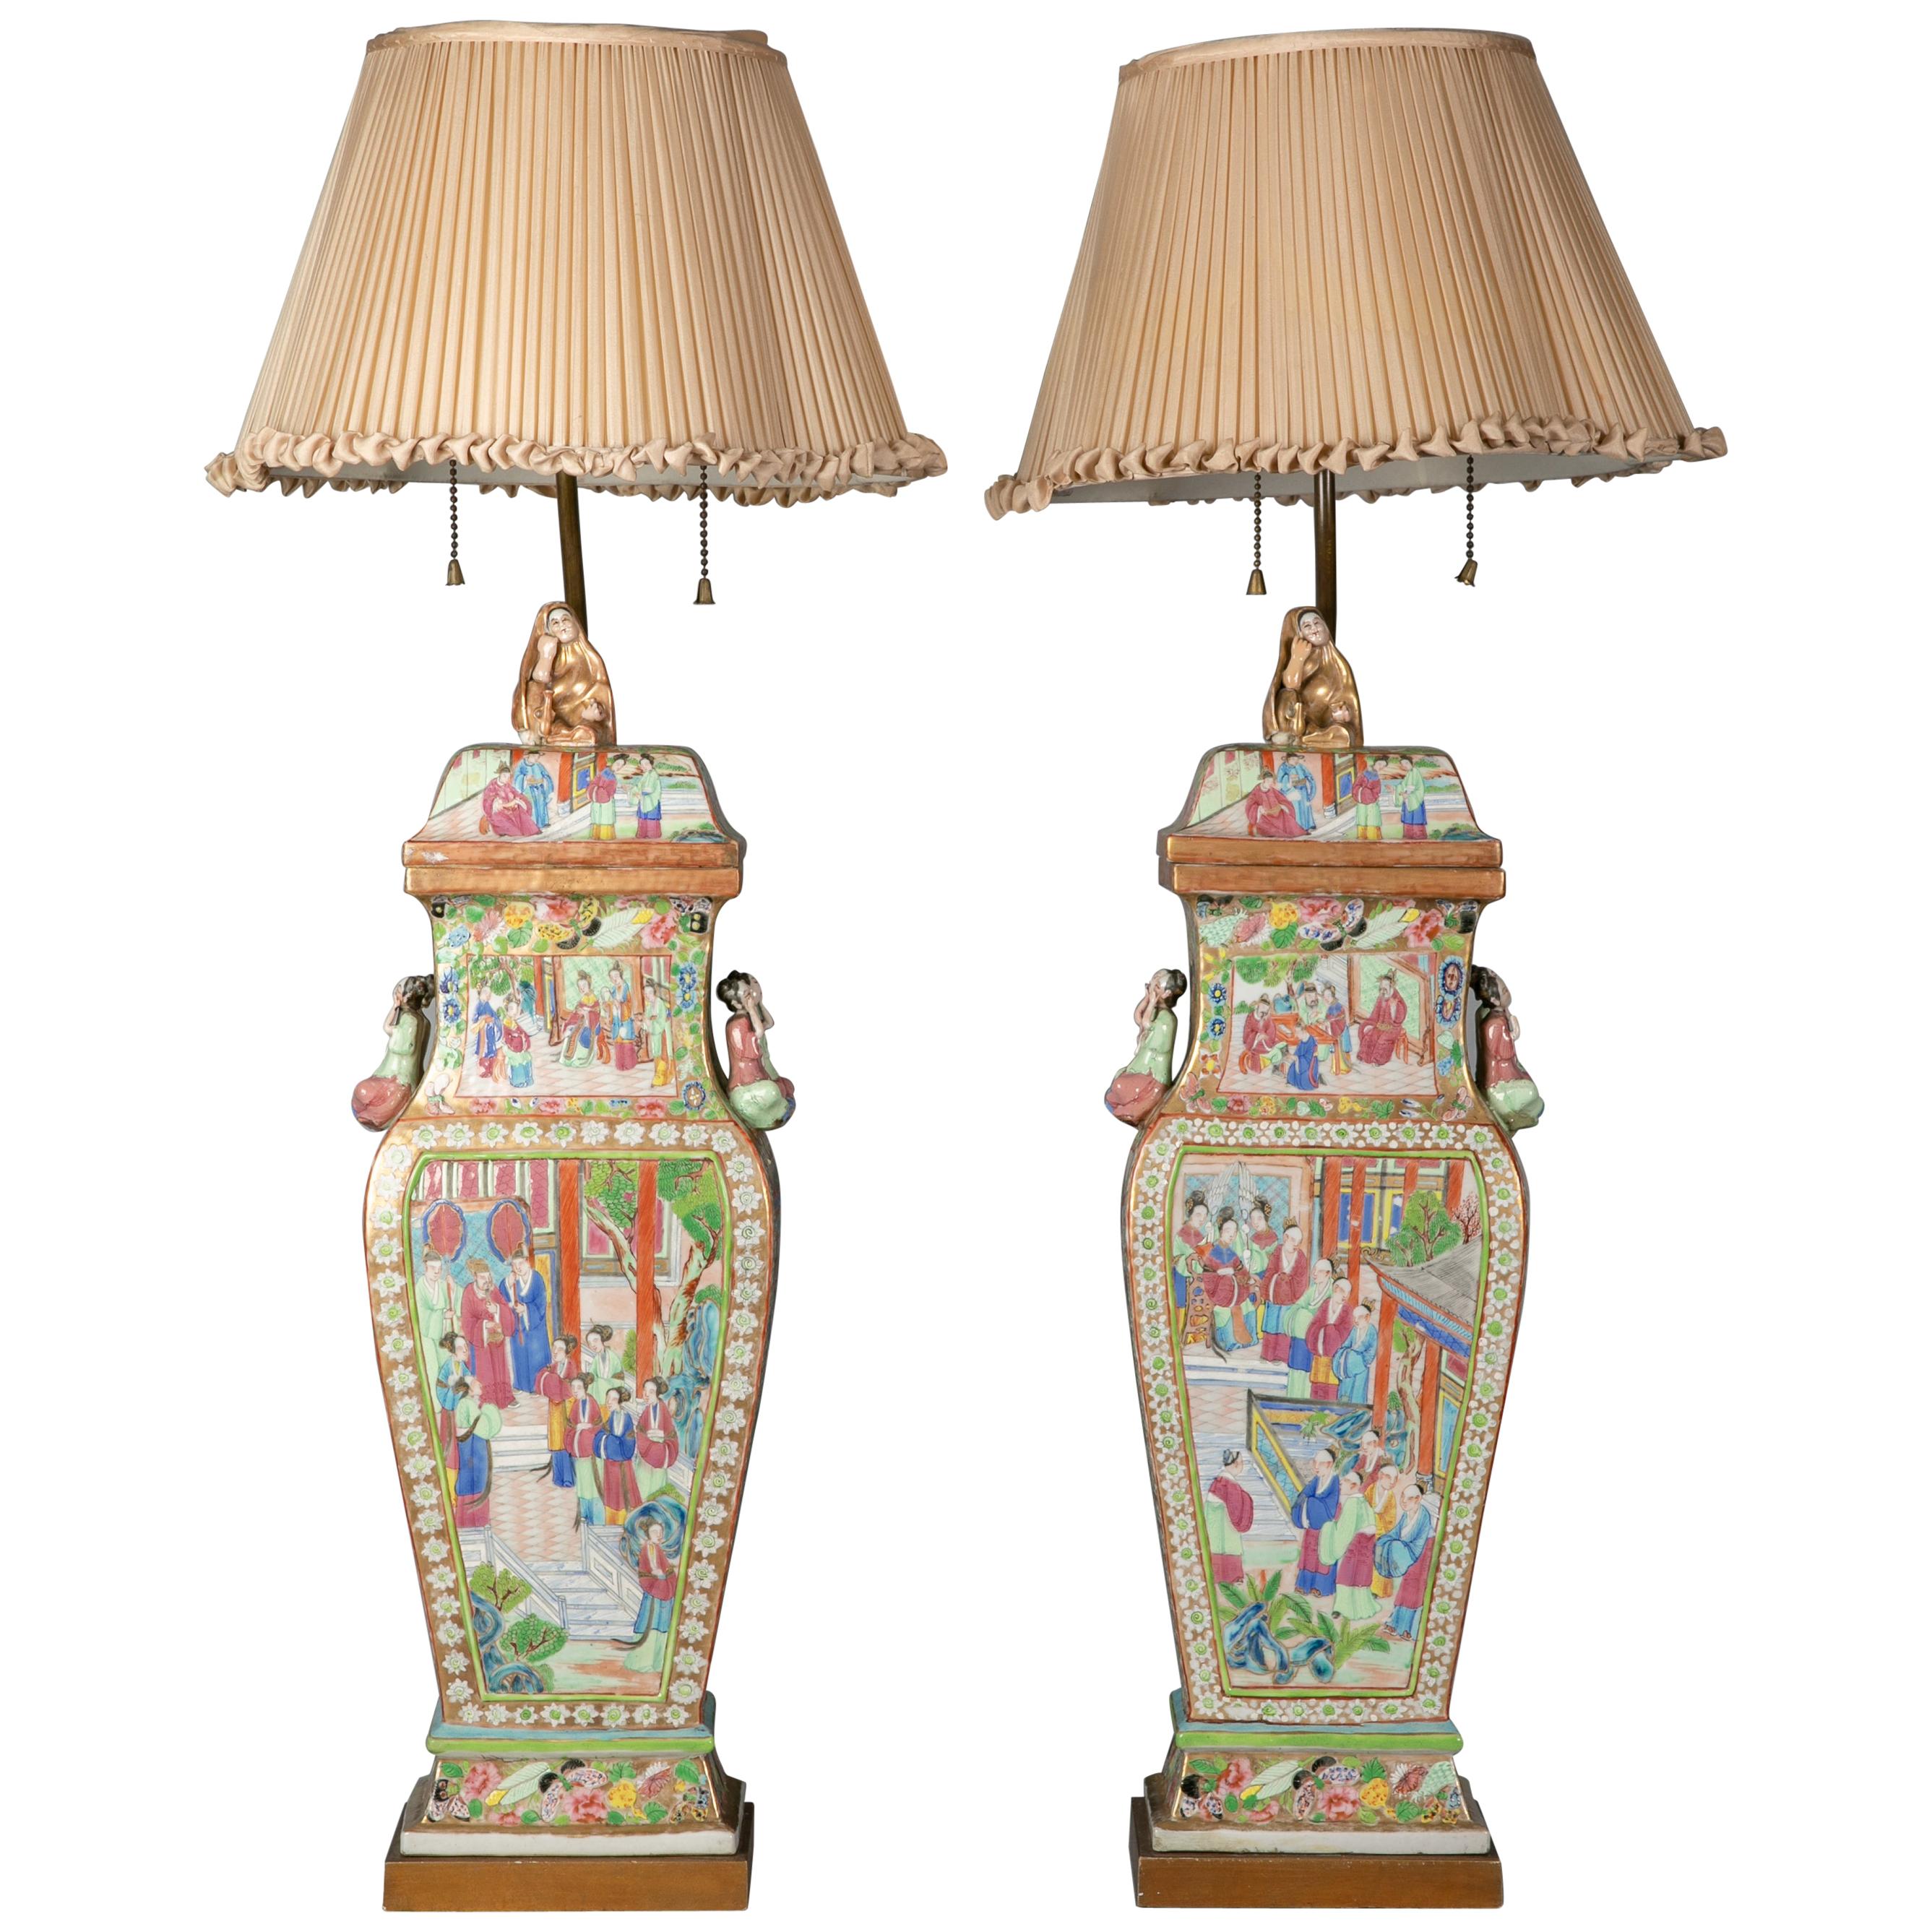 Pair of Fine Chinese Porcelain Rose Mandarin Covered Vases as Lamps, circa 1840 For Sale